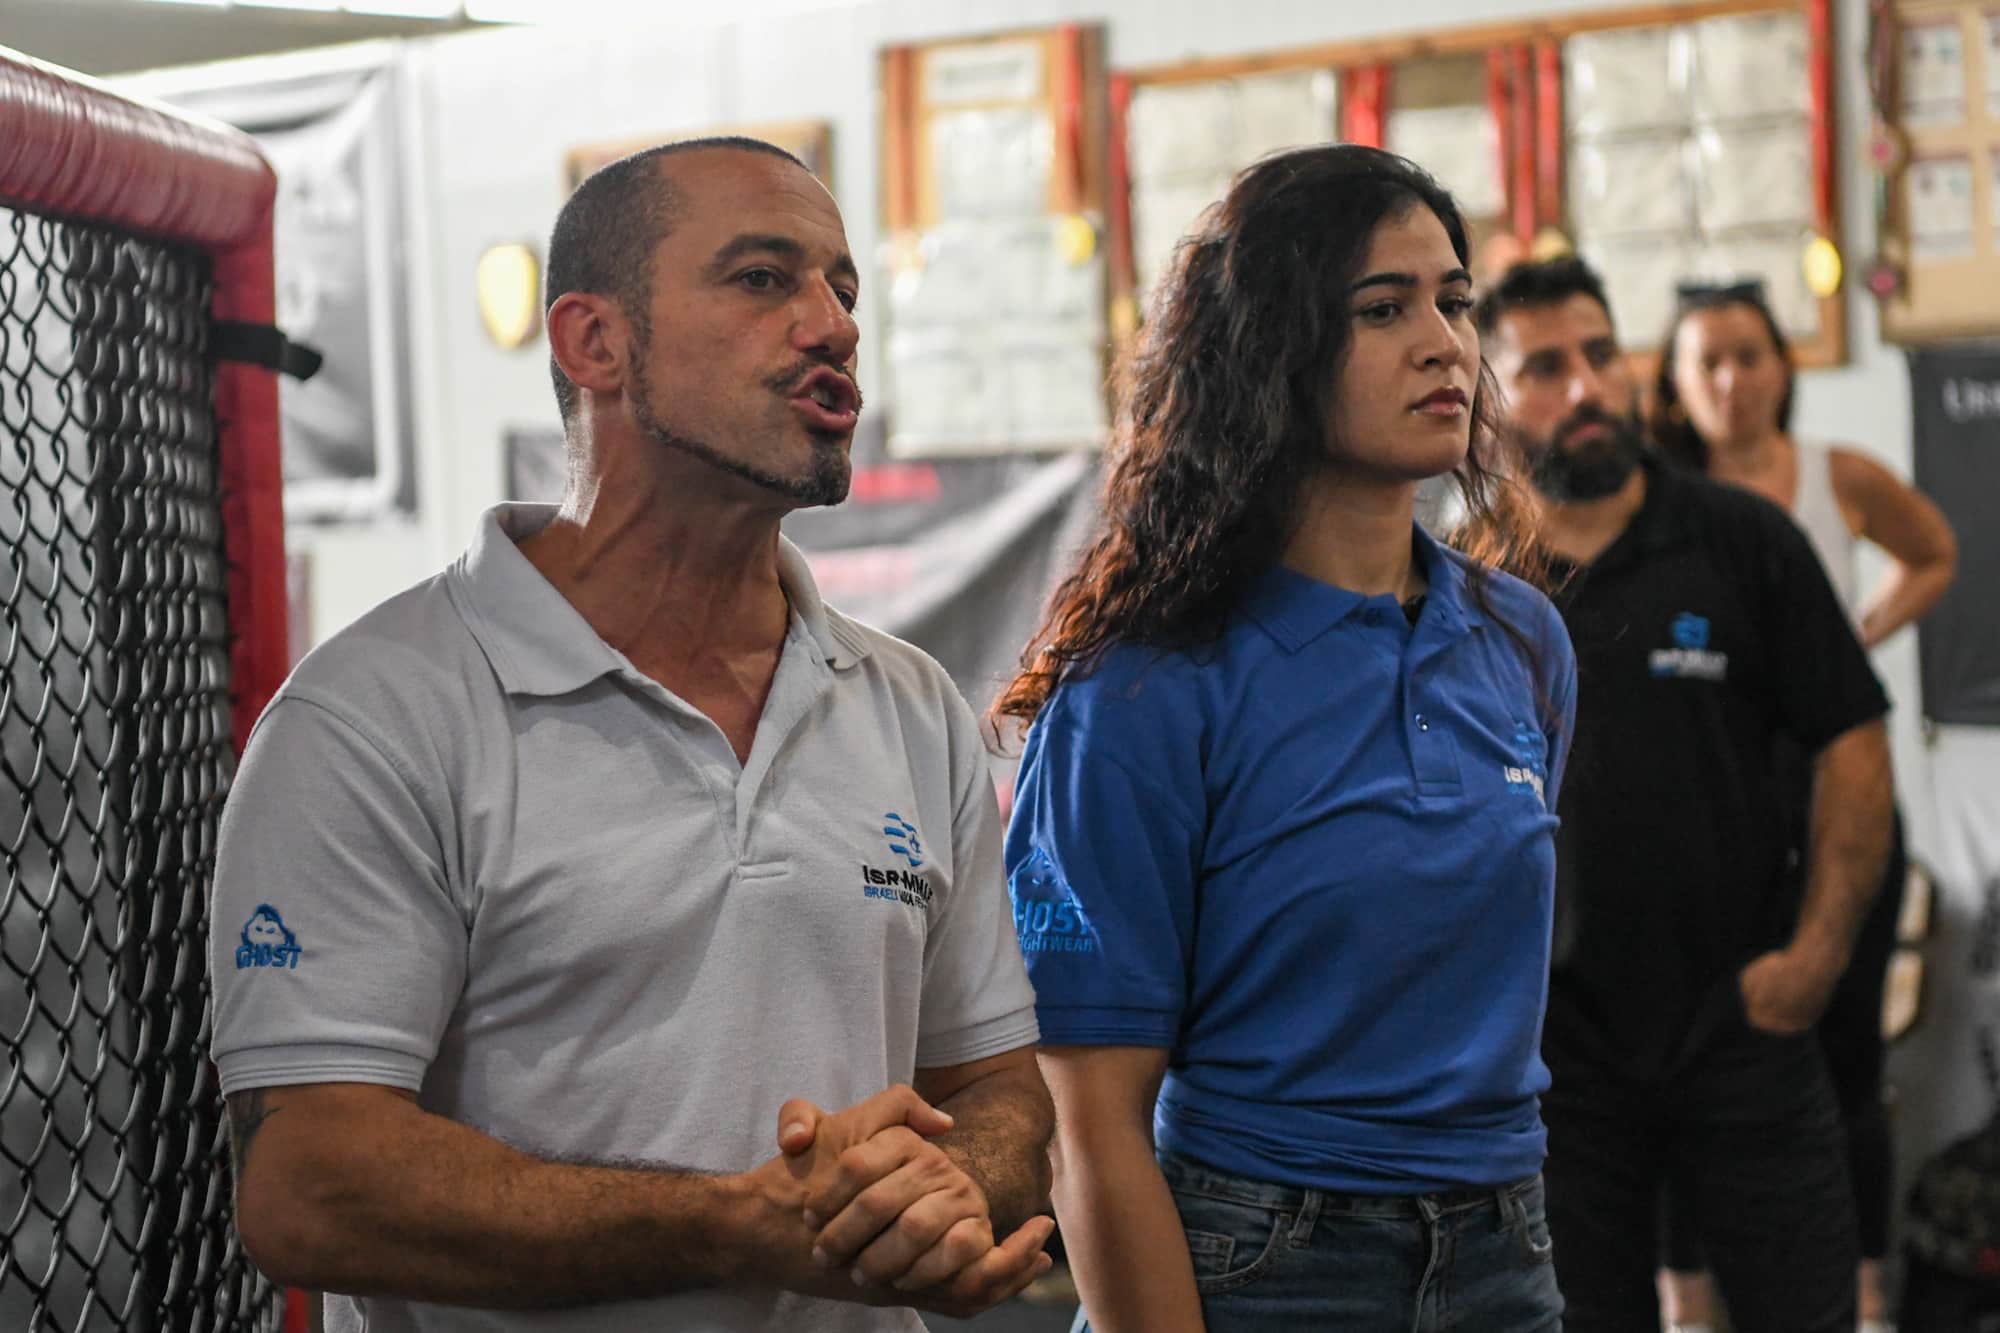 Israel Mixed Martial Arts Federation Announce Formation of Women’s National Team